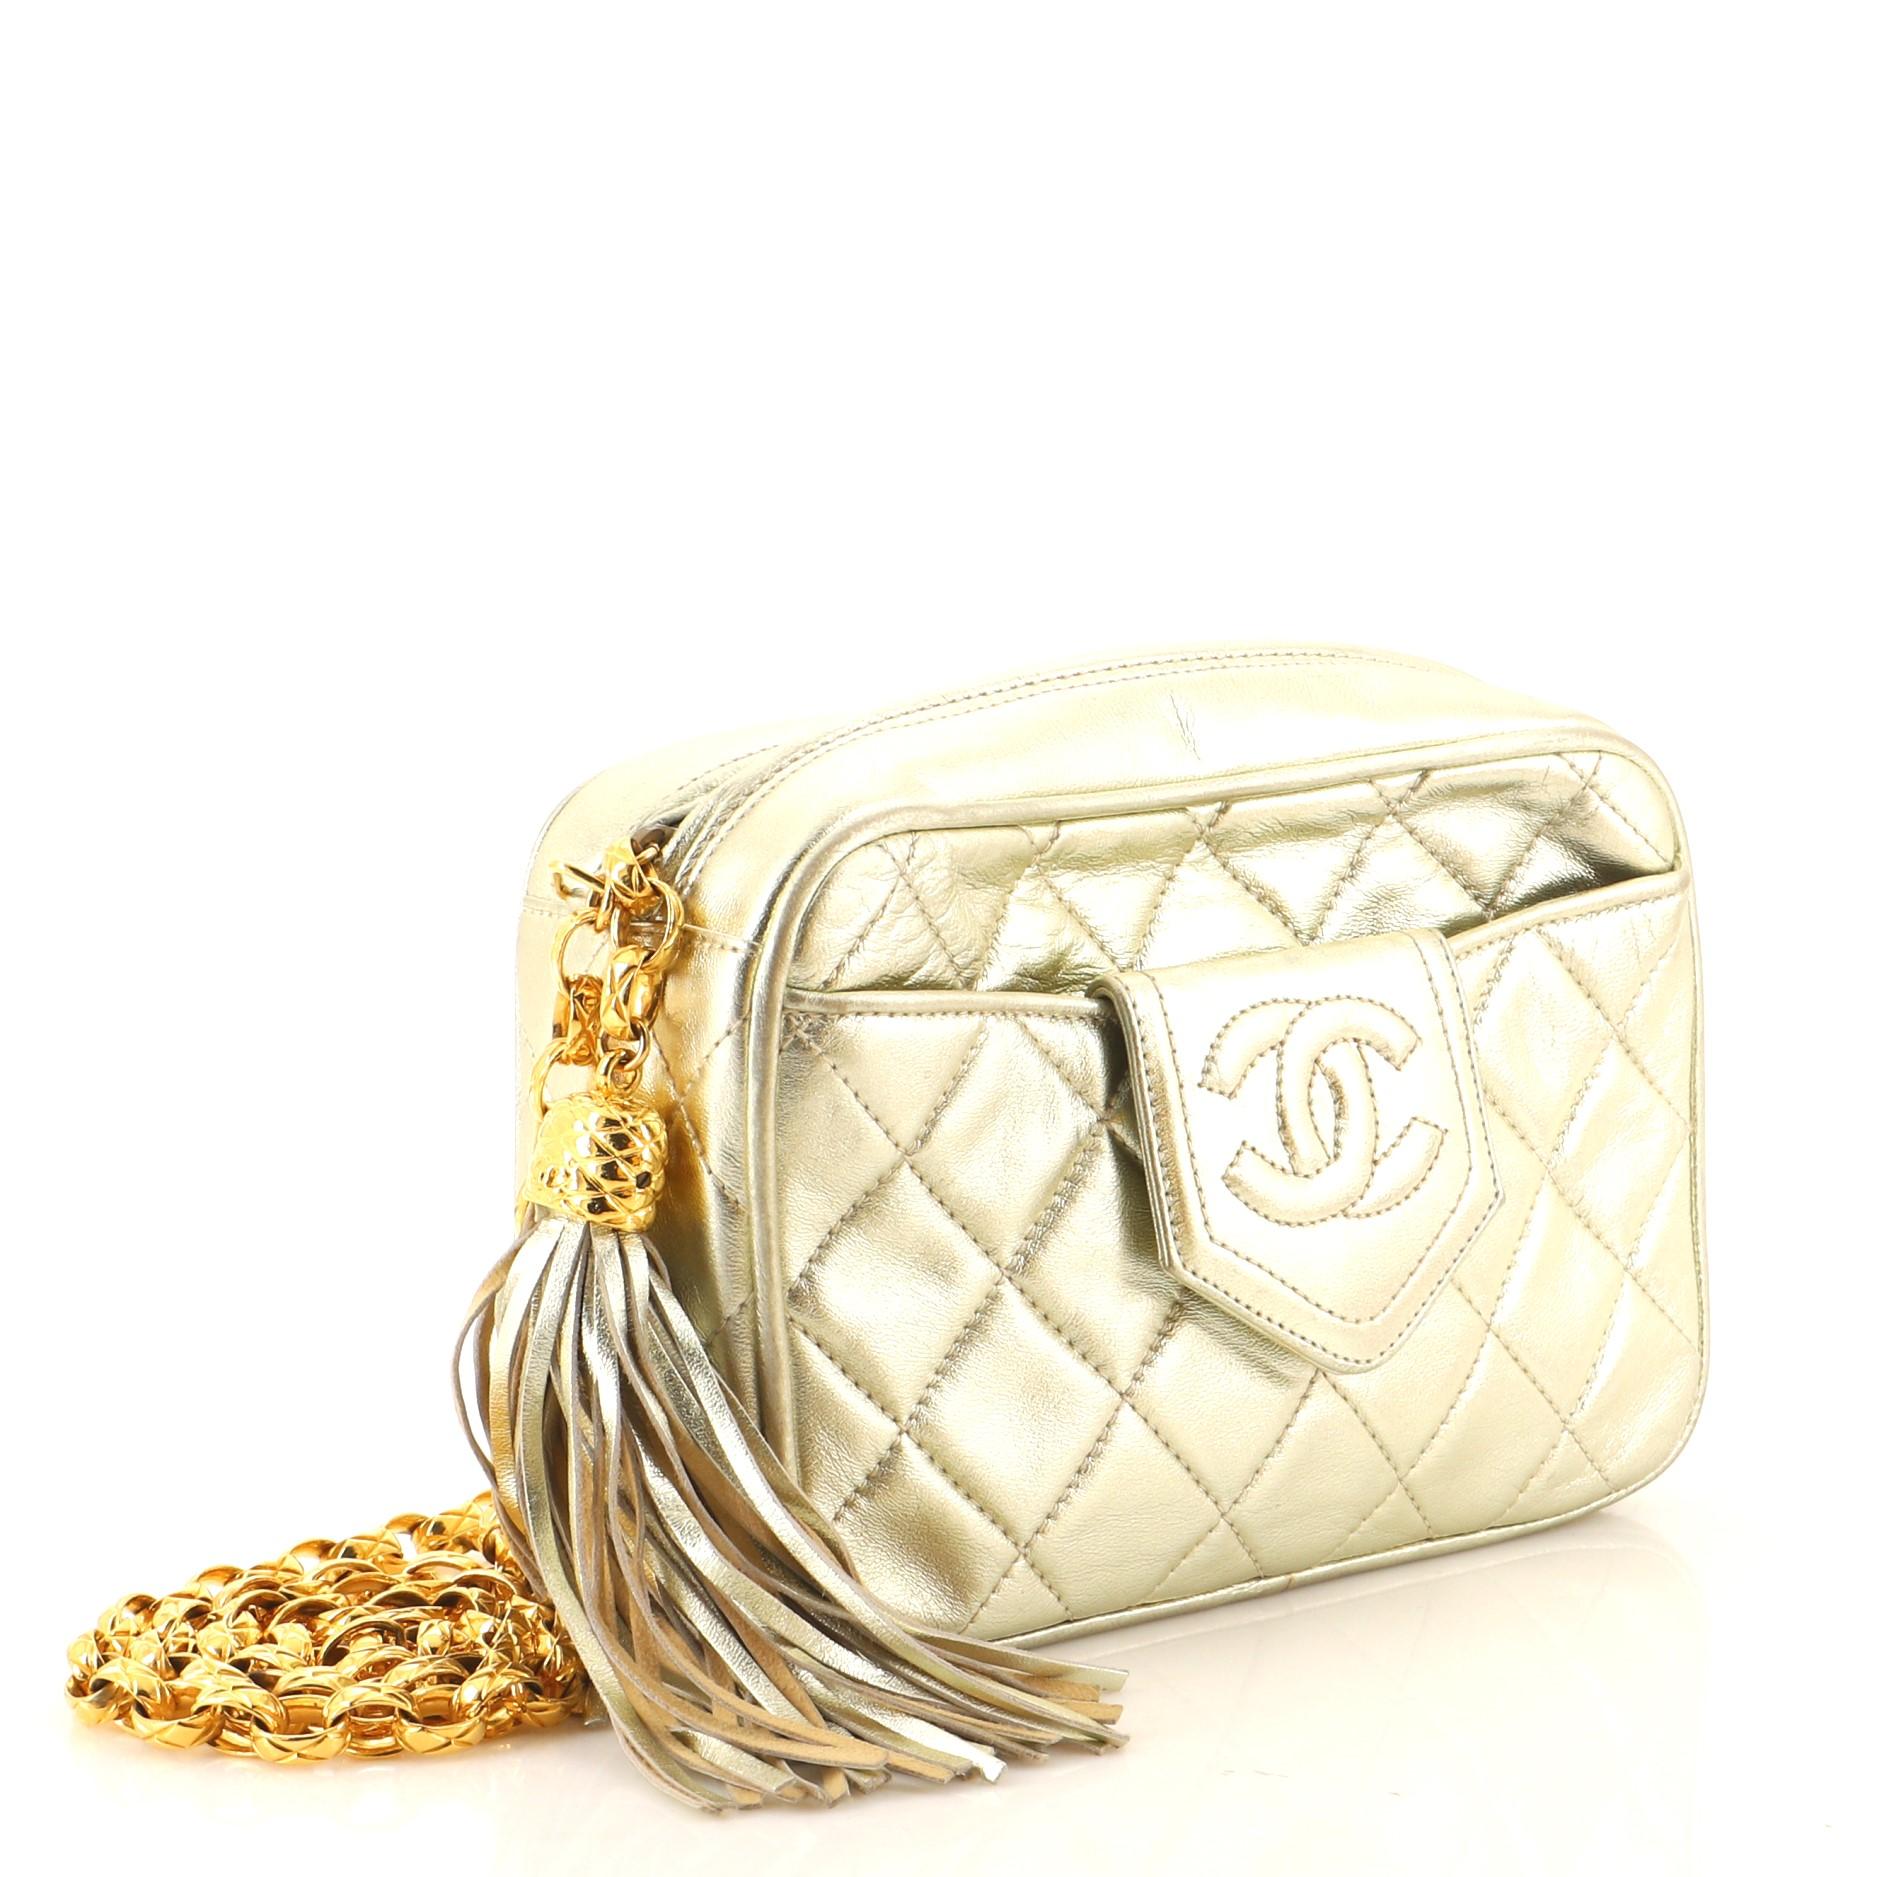 Beige Chanel Vintage Front Pocket Camera Bag Quilted Leather Small